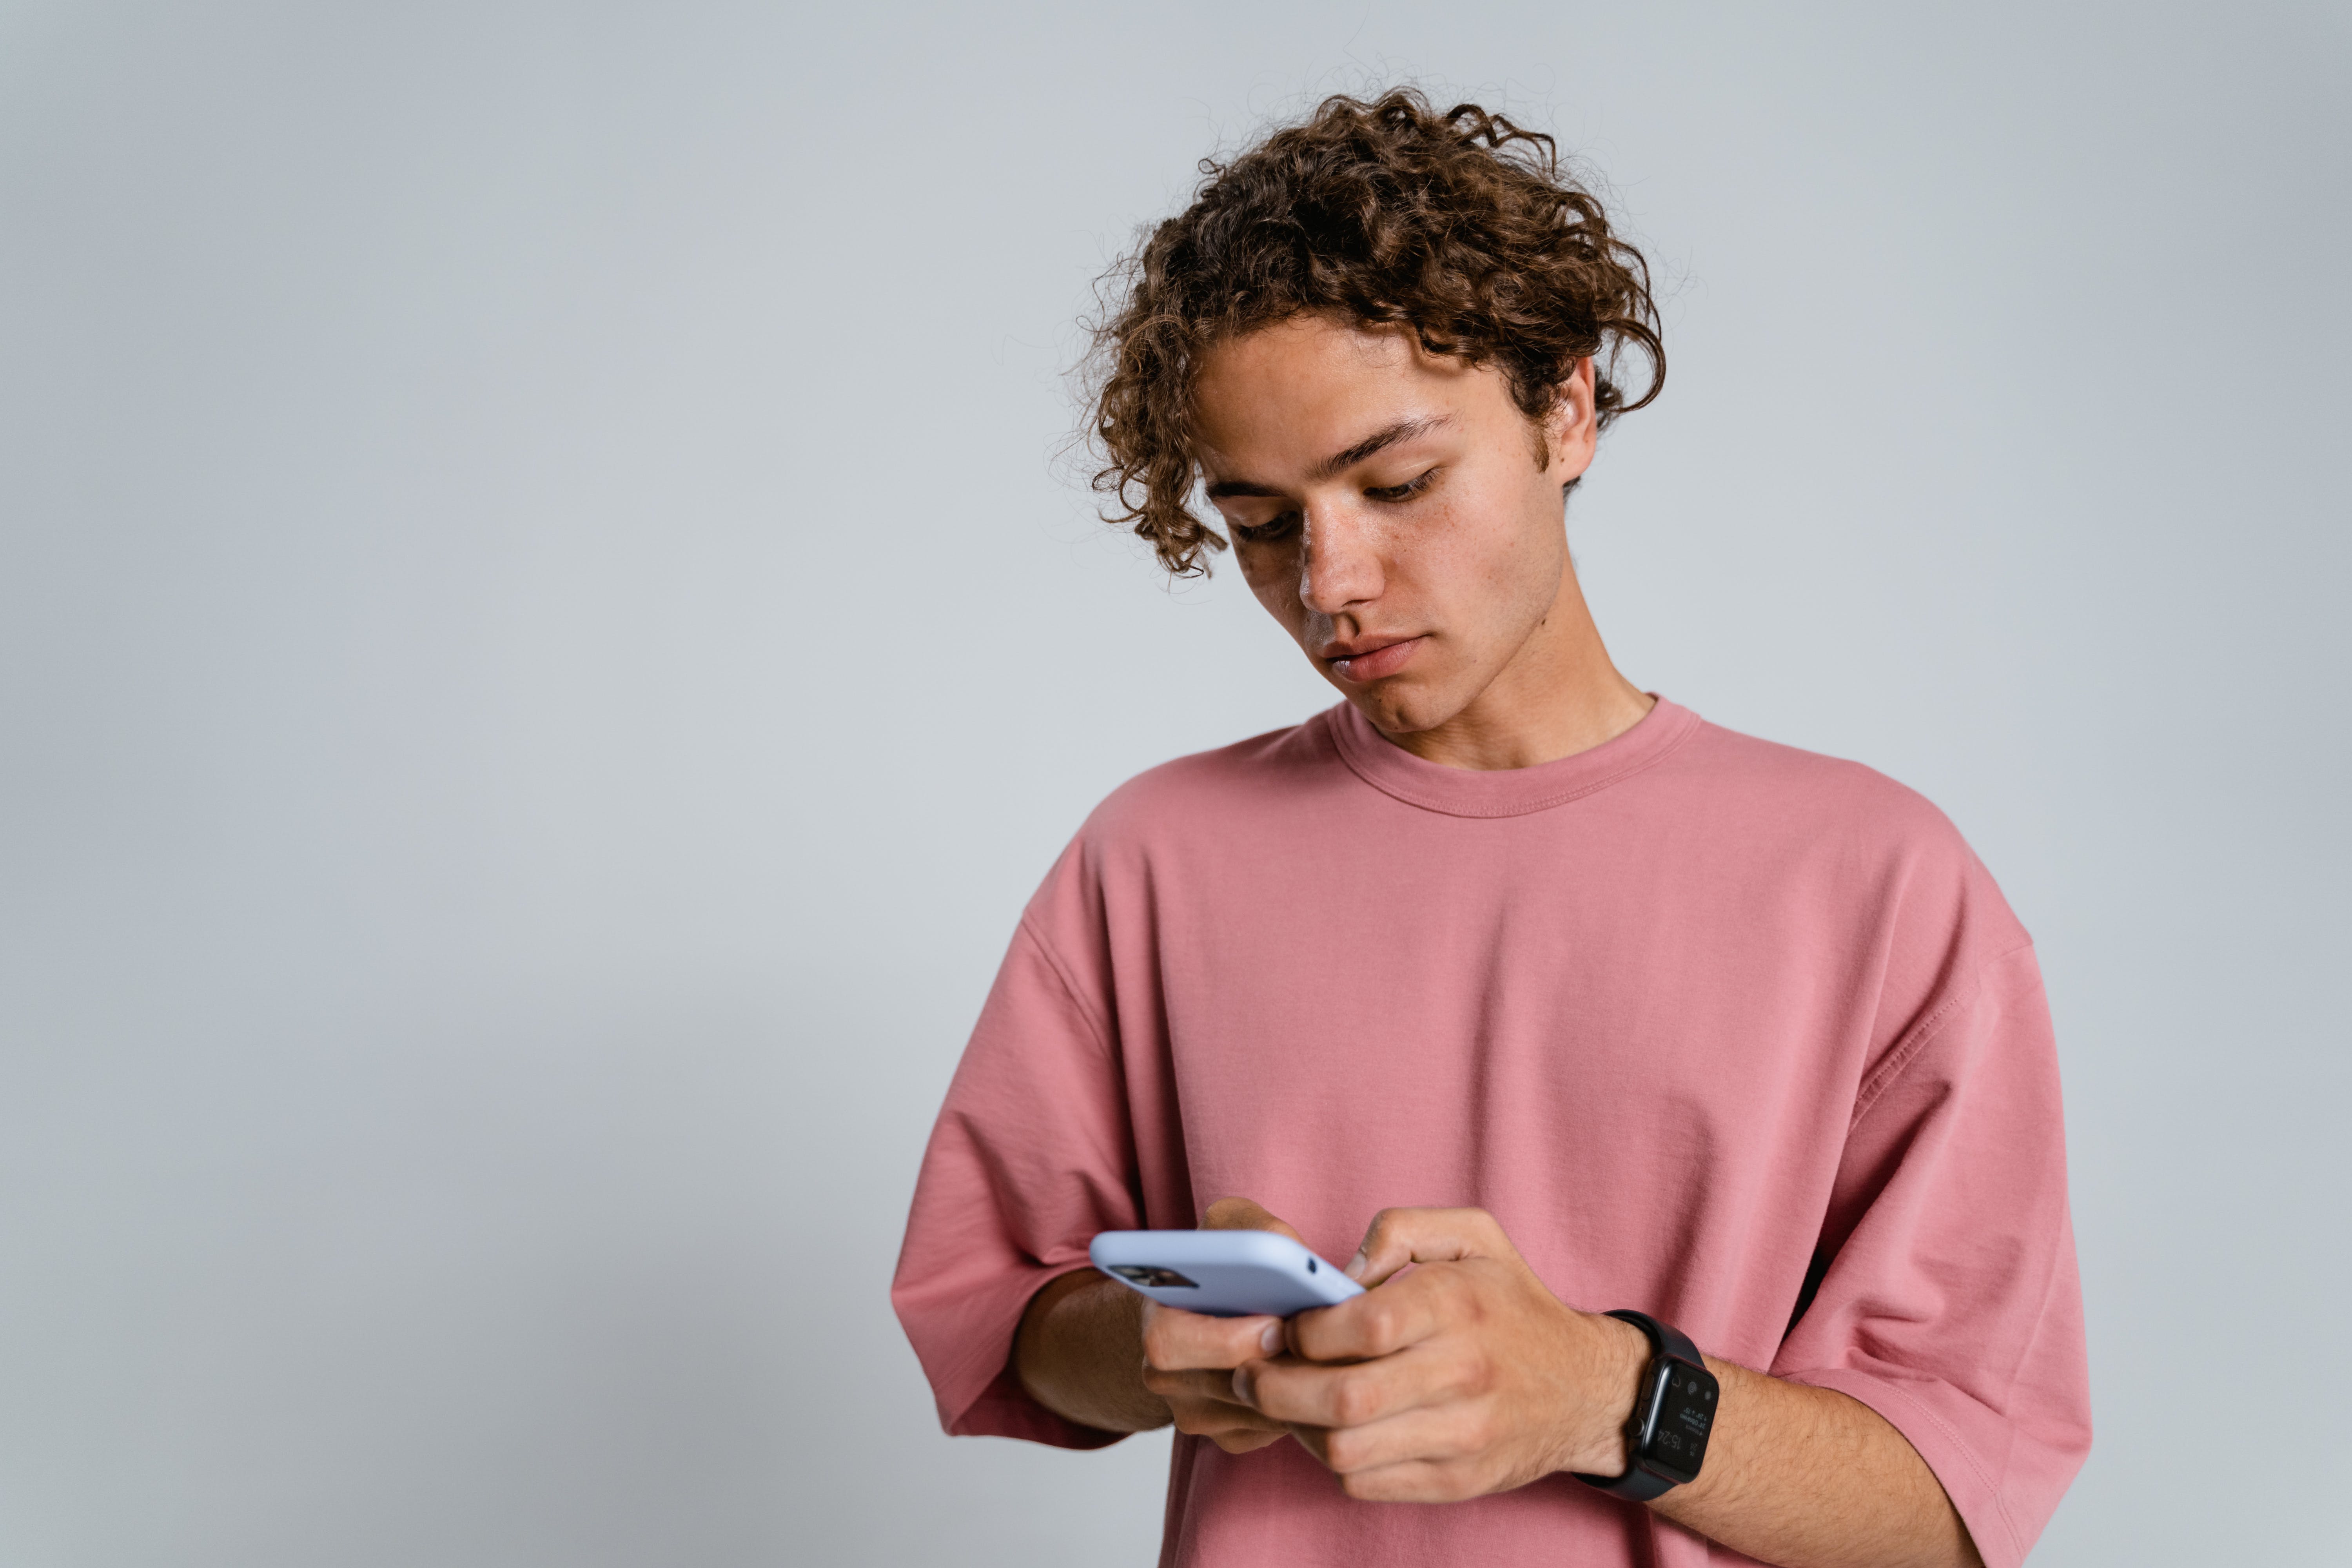 Teenager on a phone | Source: Pexels